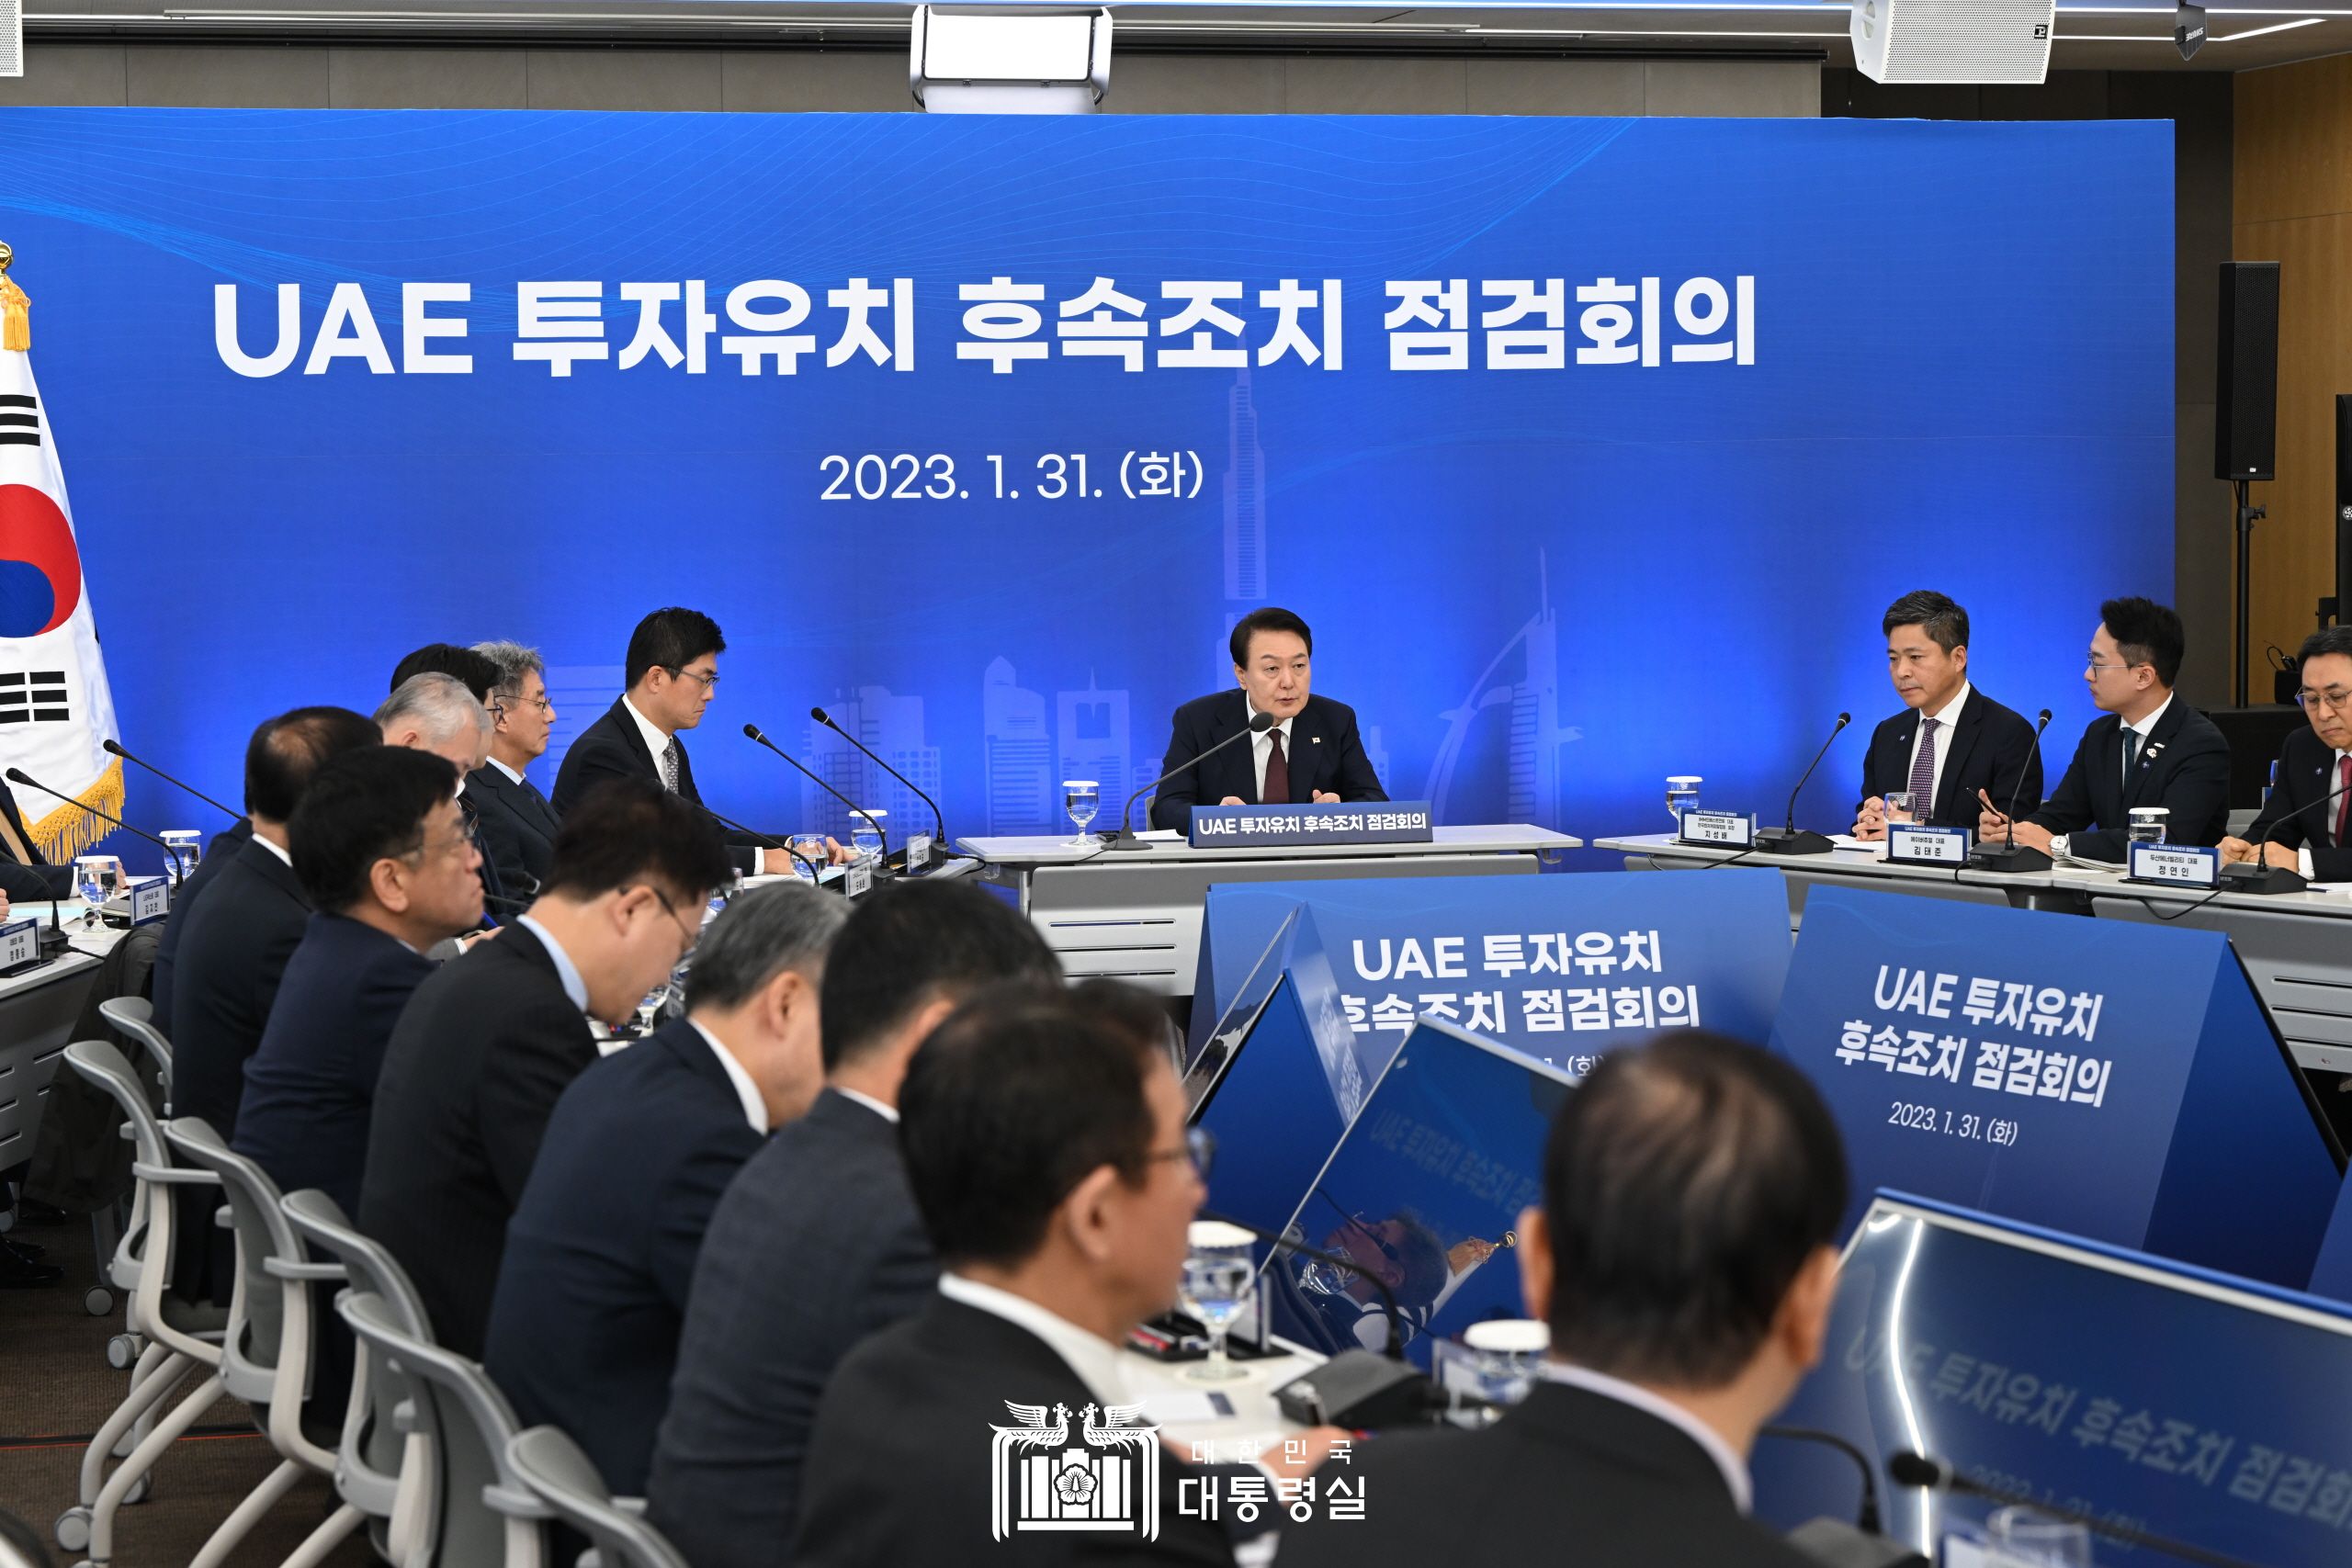 President Yoon Suk Yeol on Jan. 31 speaks at a meeting on follow-up measures for the United Arab Emirates' pledge to invest in the country at the Korea International Trade Association building in Seoul's Gangnam-gu District. (Office of the President)